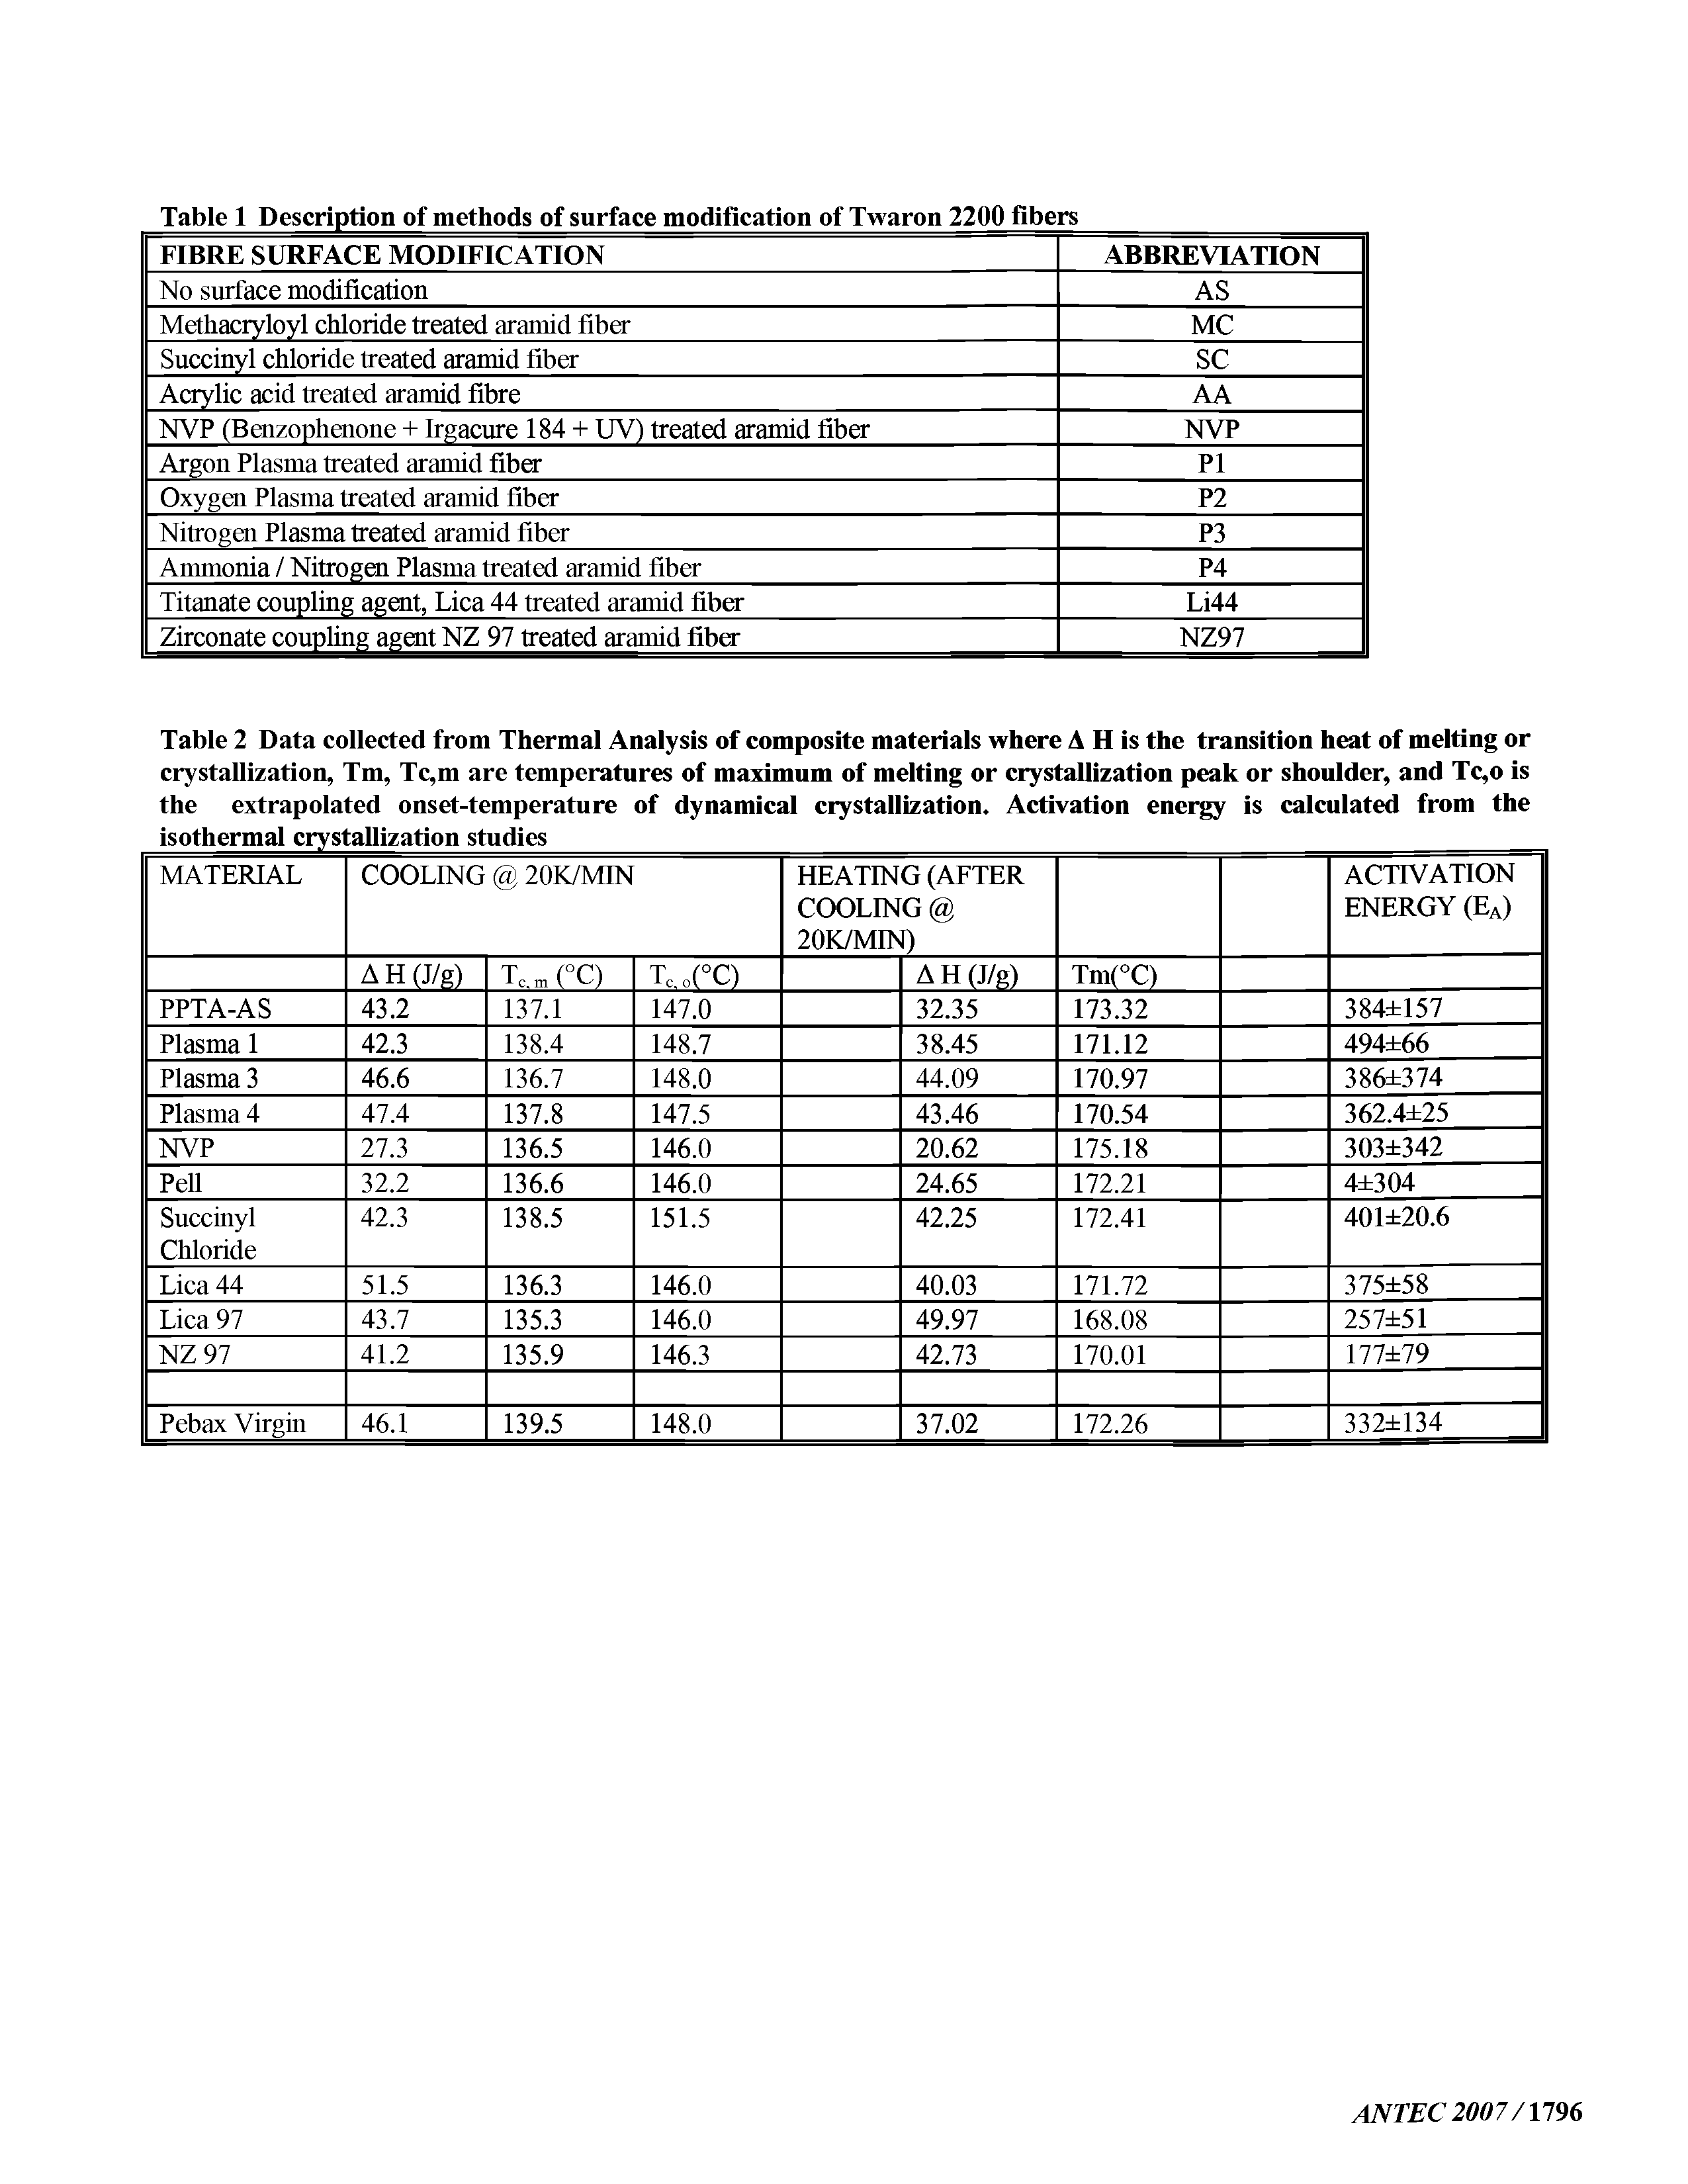 Table 2 Data collected from Thermal Analysis of composite materials where A H is the transition heat of melting or crystallization, Tm, Tc,m are temperatures of maximum of melting or crystallization peak or shoulder, and Tc,o is the extrapolated onset-temperature of dynamical crystallization. Activation energy is calculated from the...